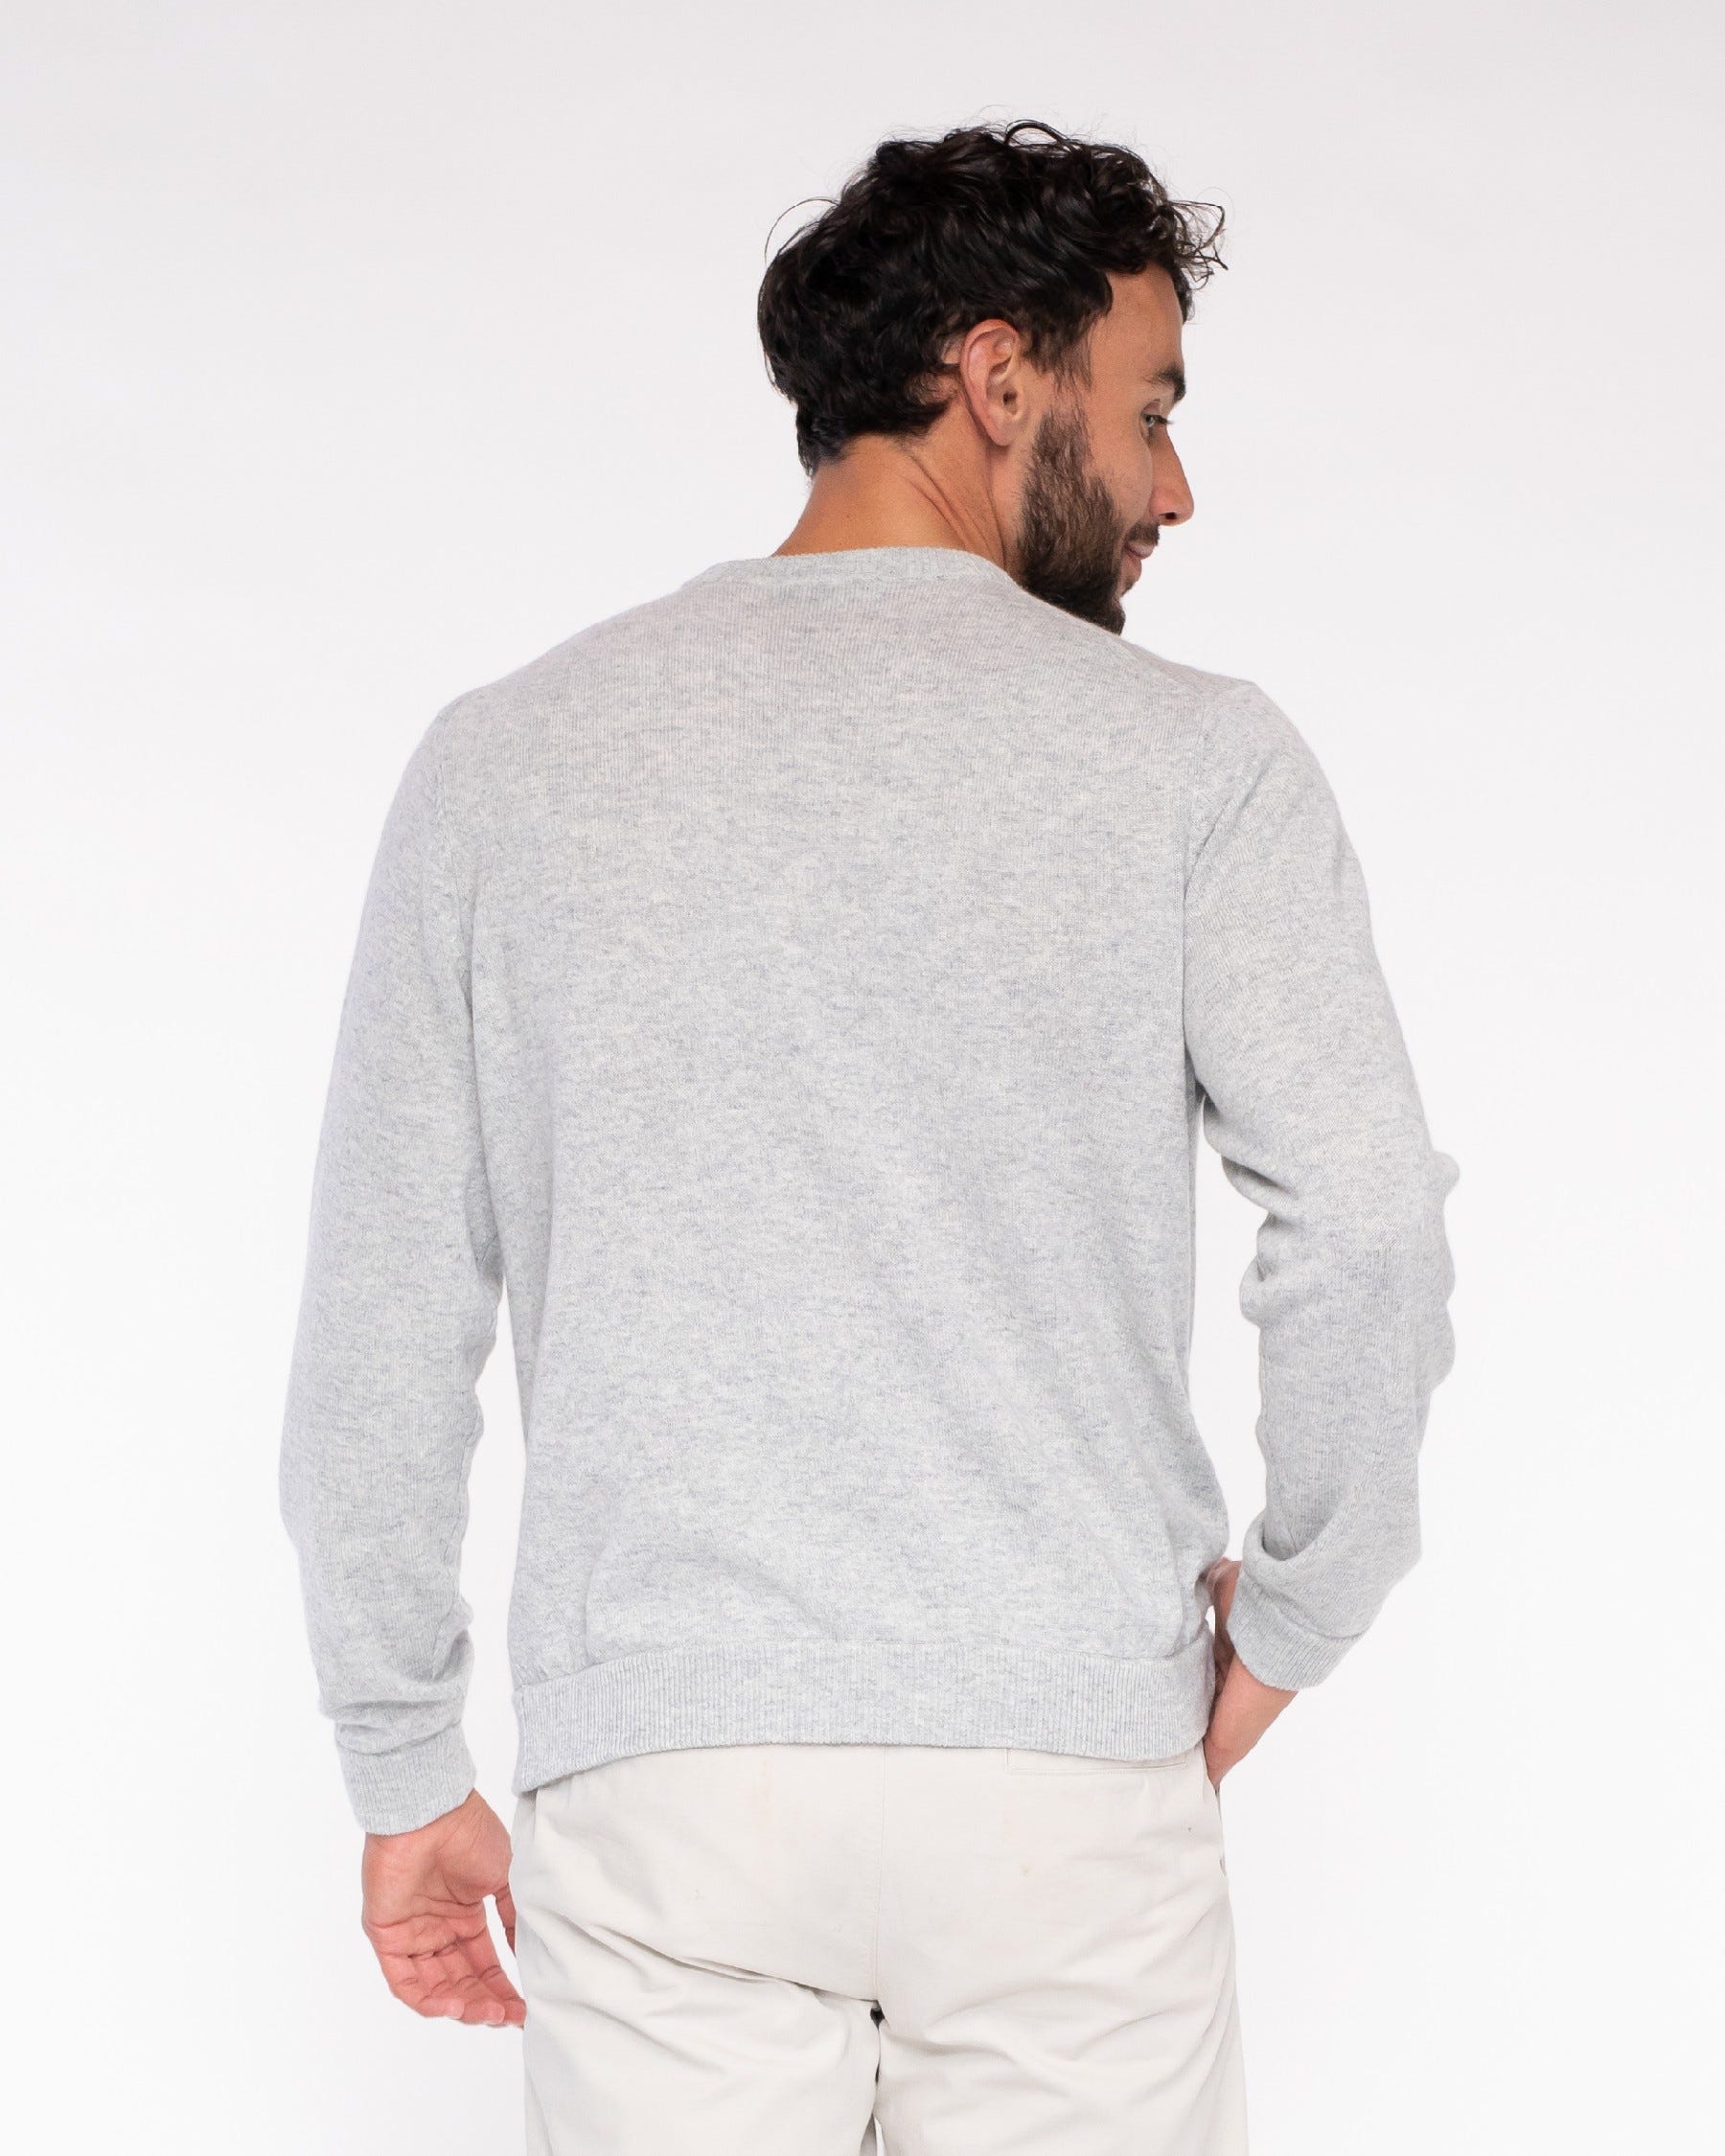 Classic Crew Neck 100% Cashmere Sweater (Choice of Colors) by Alashan Cashmere